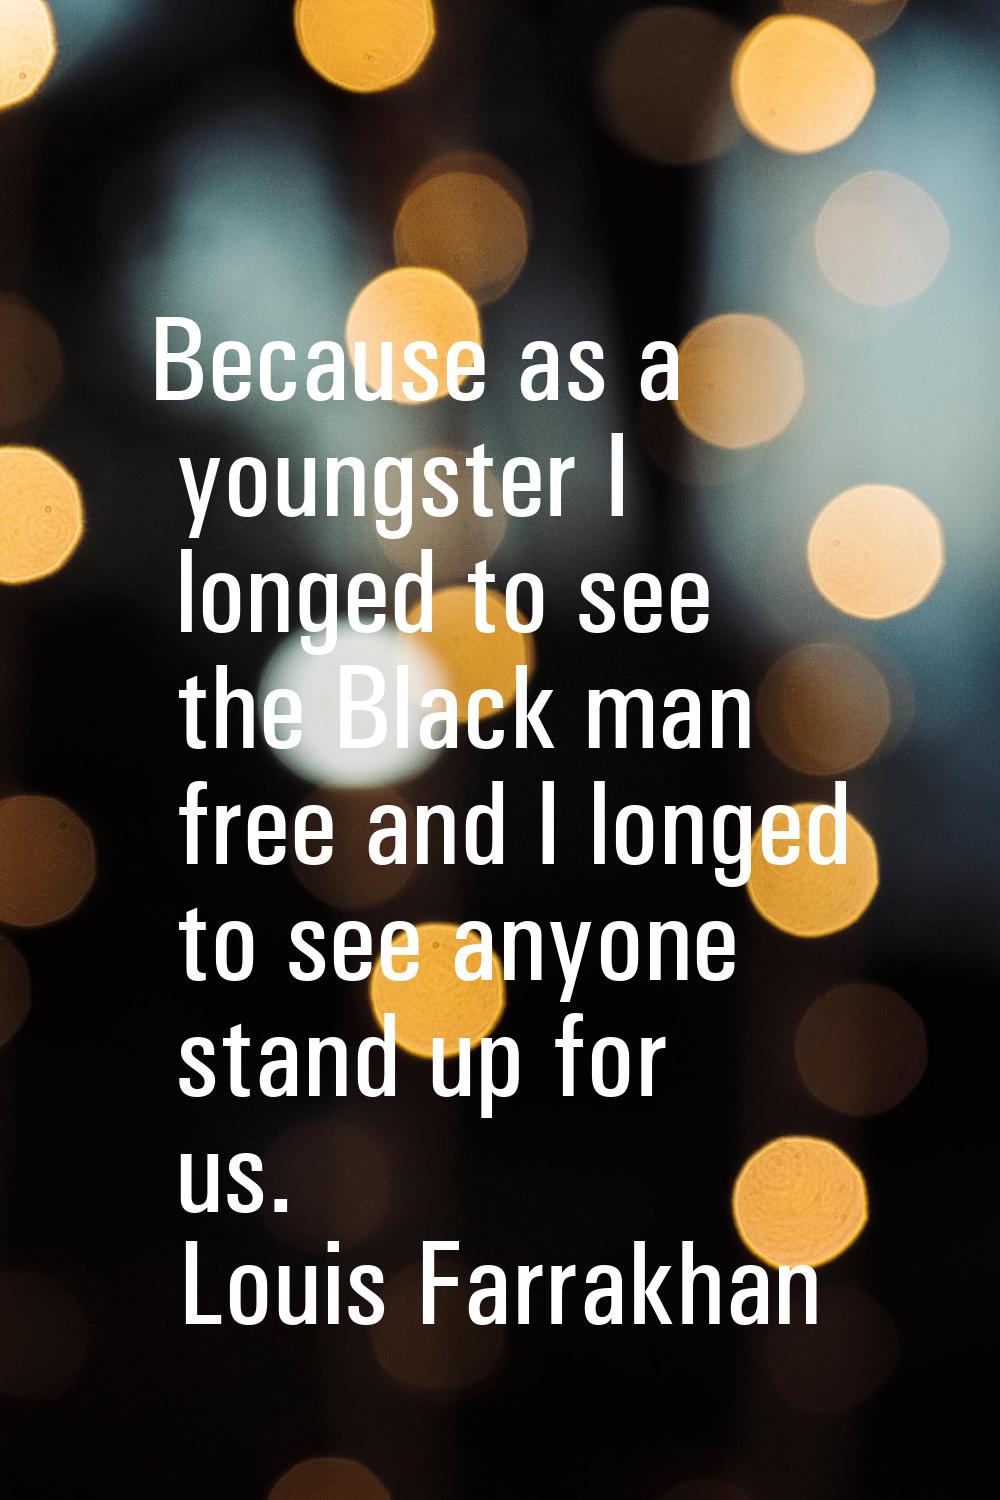 Because as a youngster I longed to see the Black man free and I longed to see anyone stand up for u